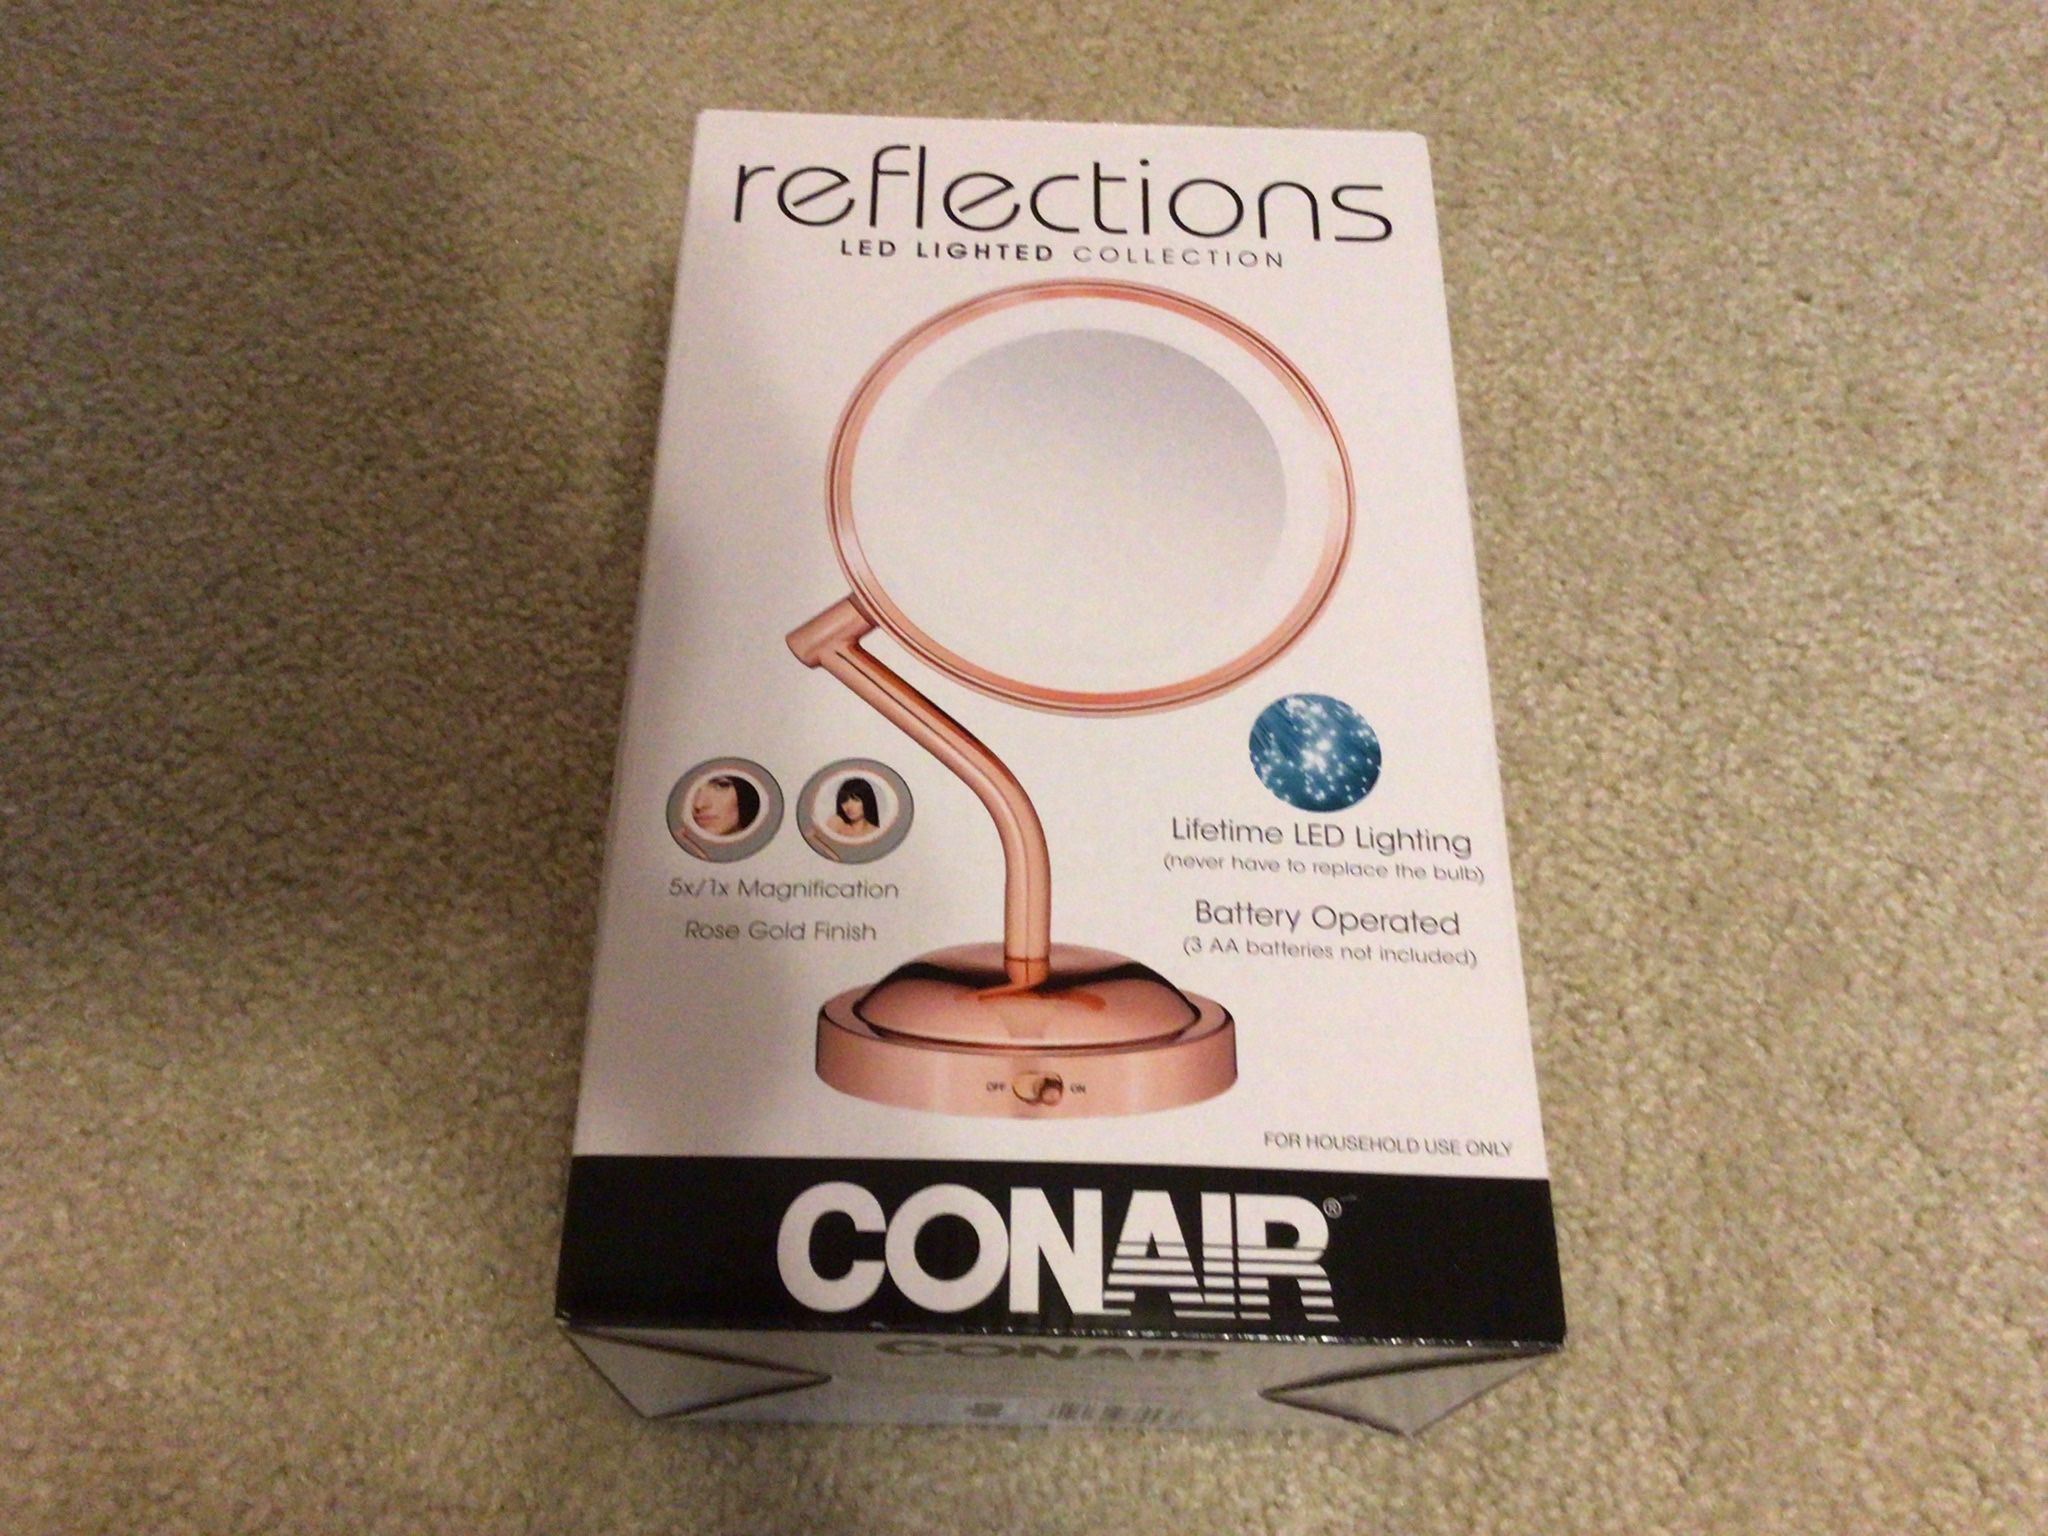 Conair Reflection LED Lighted Collection